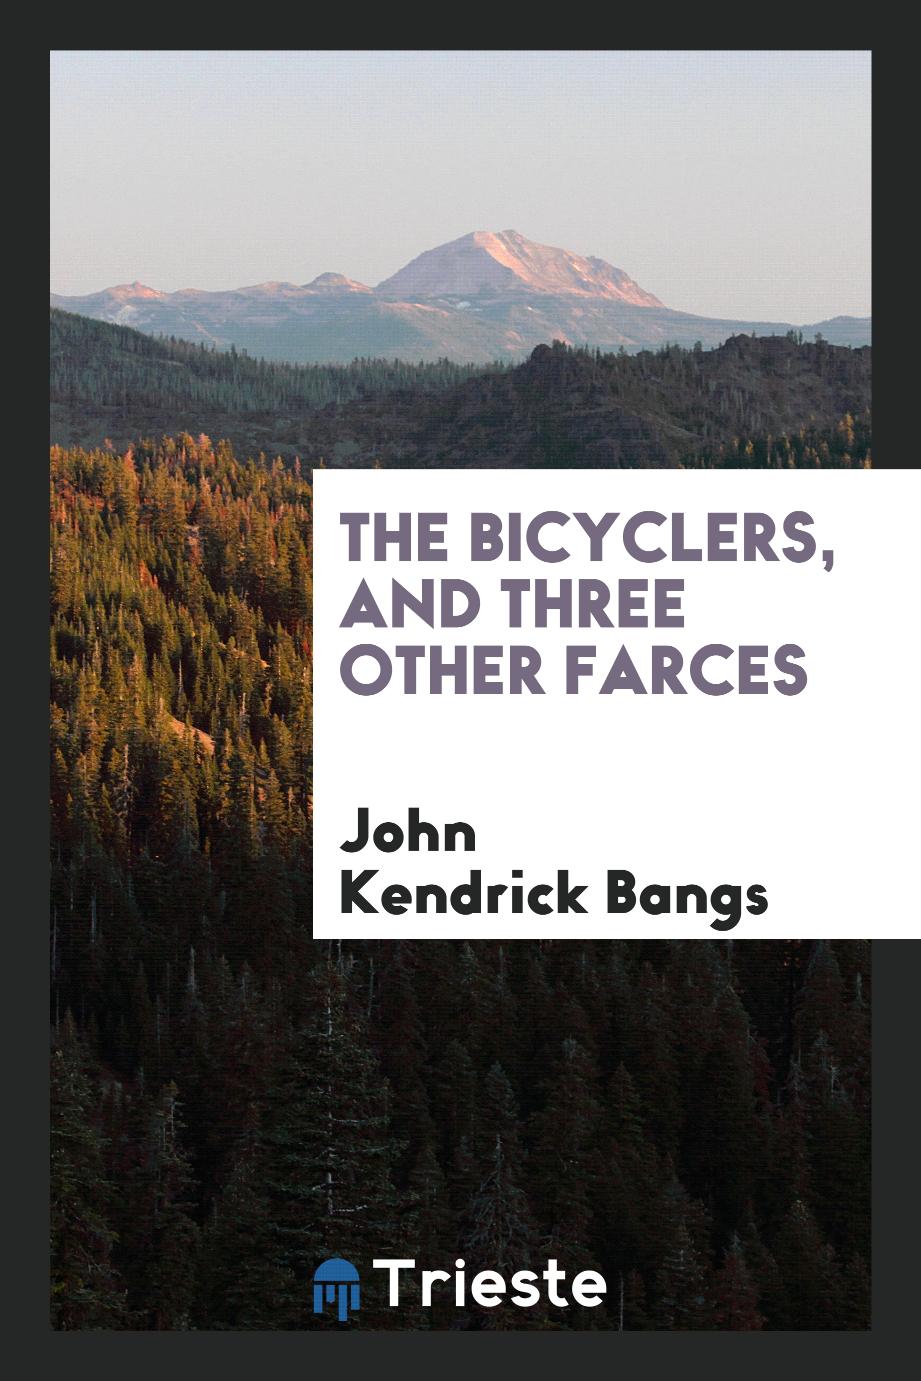 The Bicyclers, and Three Other Farces